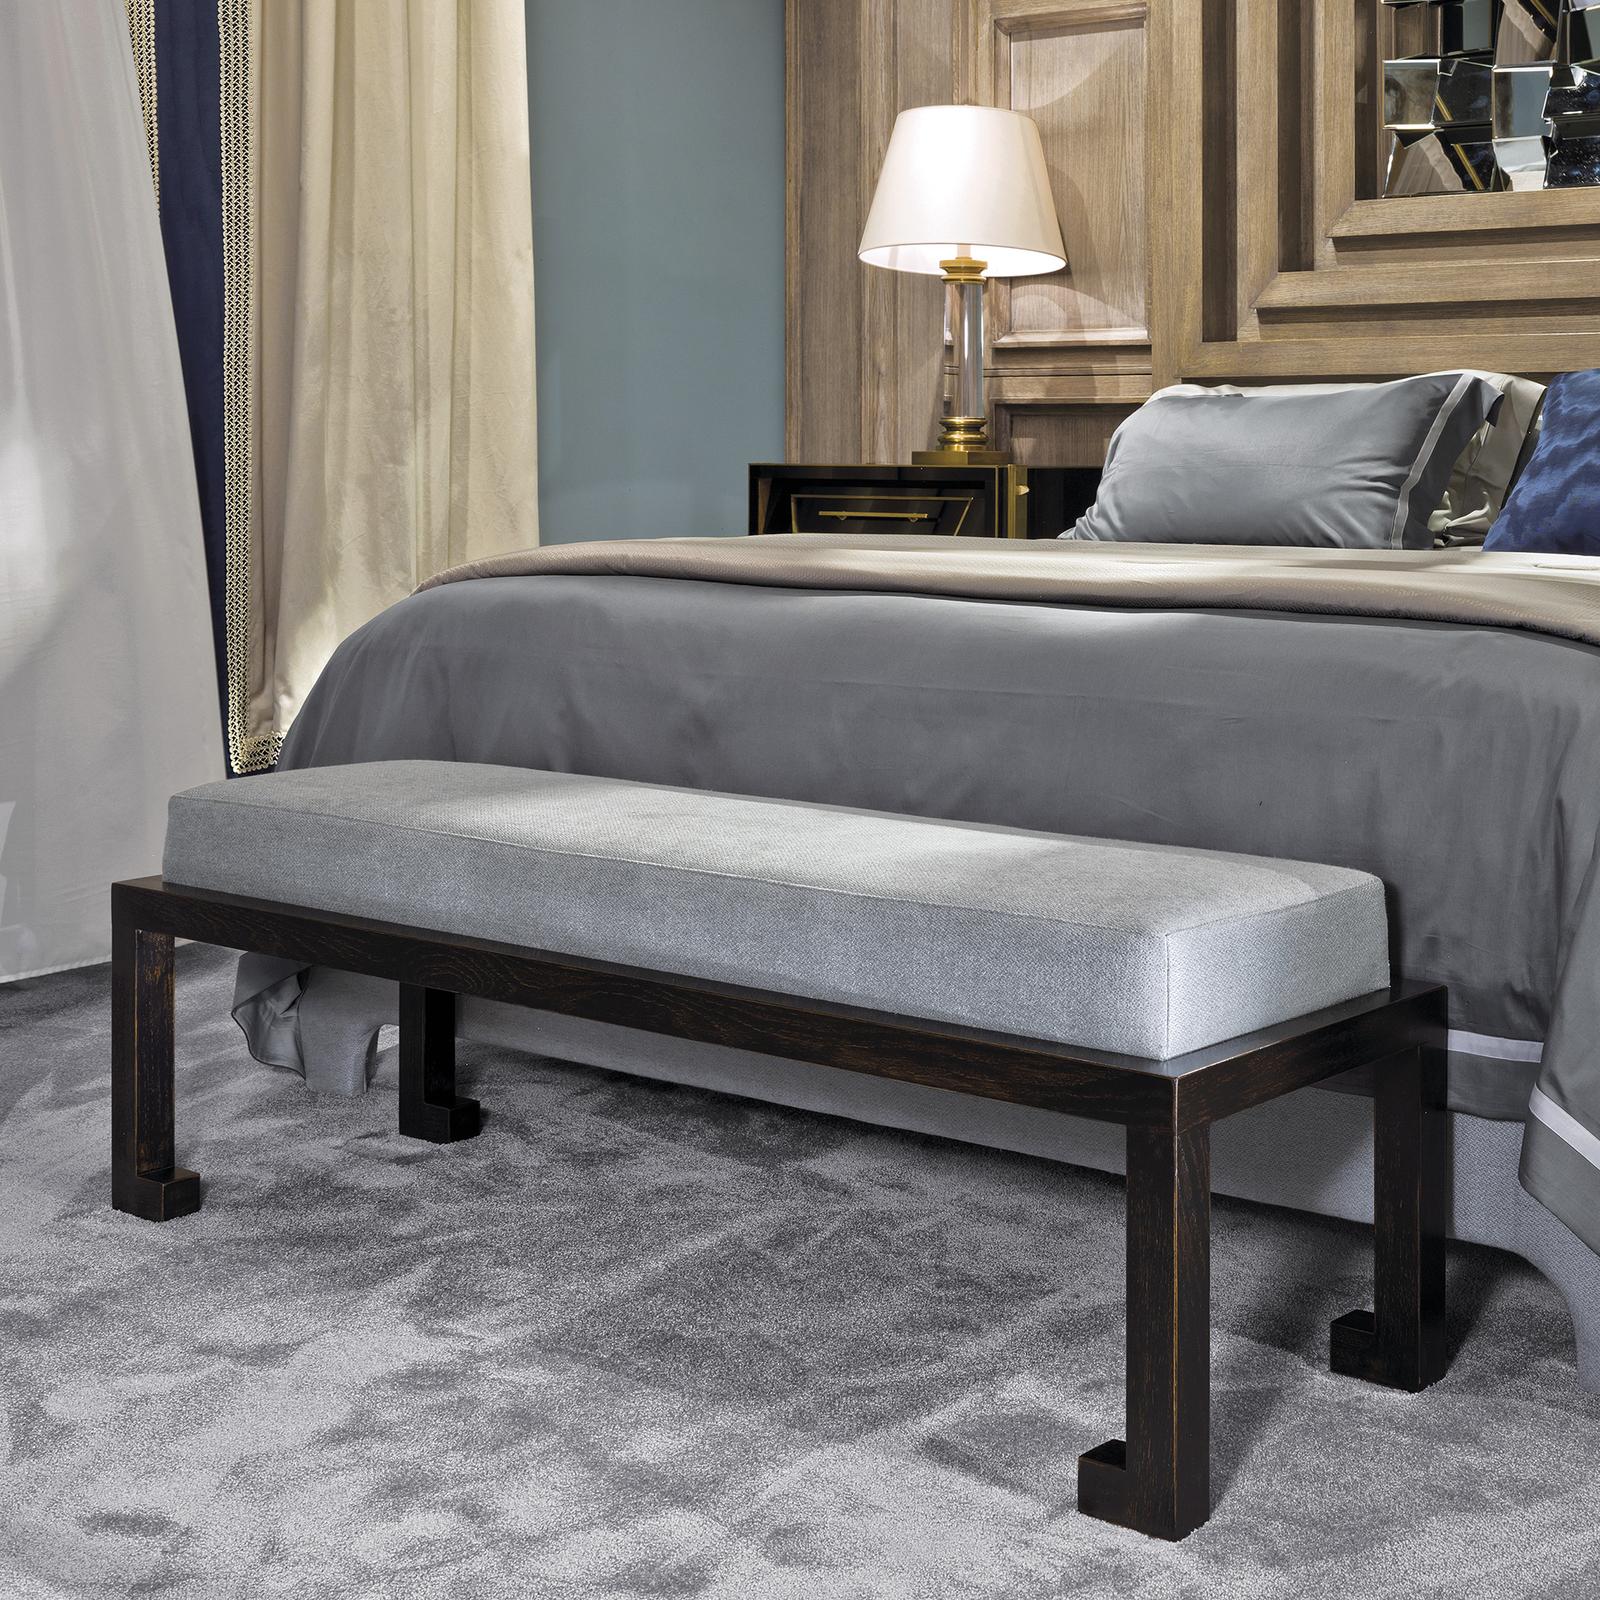 Modern and sophisticated, this bench will be an exquisite addition to a living room, entrance, or bedroom. The structure is in wood with a hand painted black finish that highlights its simple base. The rectangular cushion is upholstered with a light